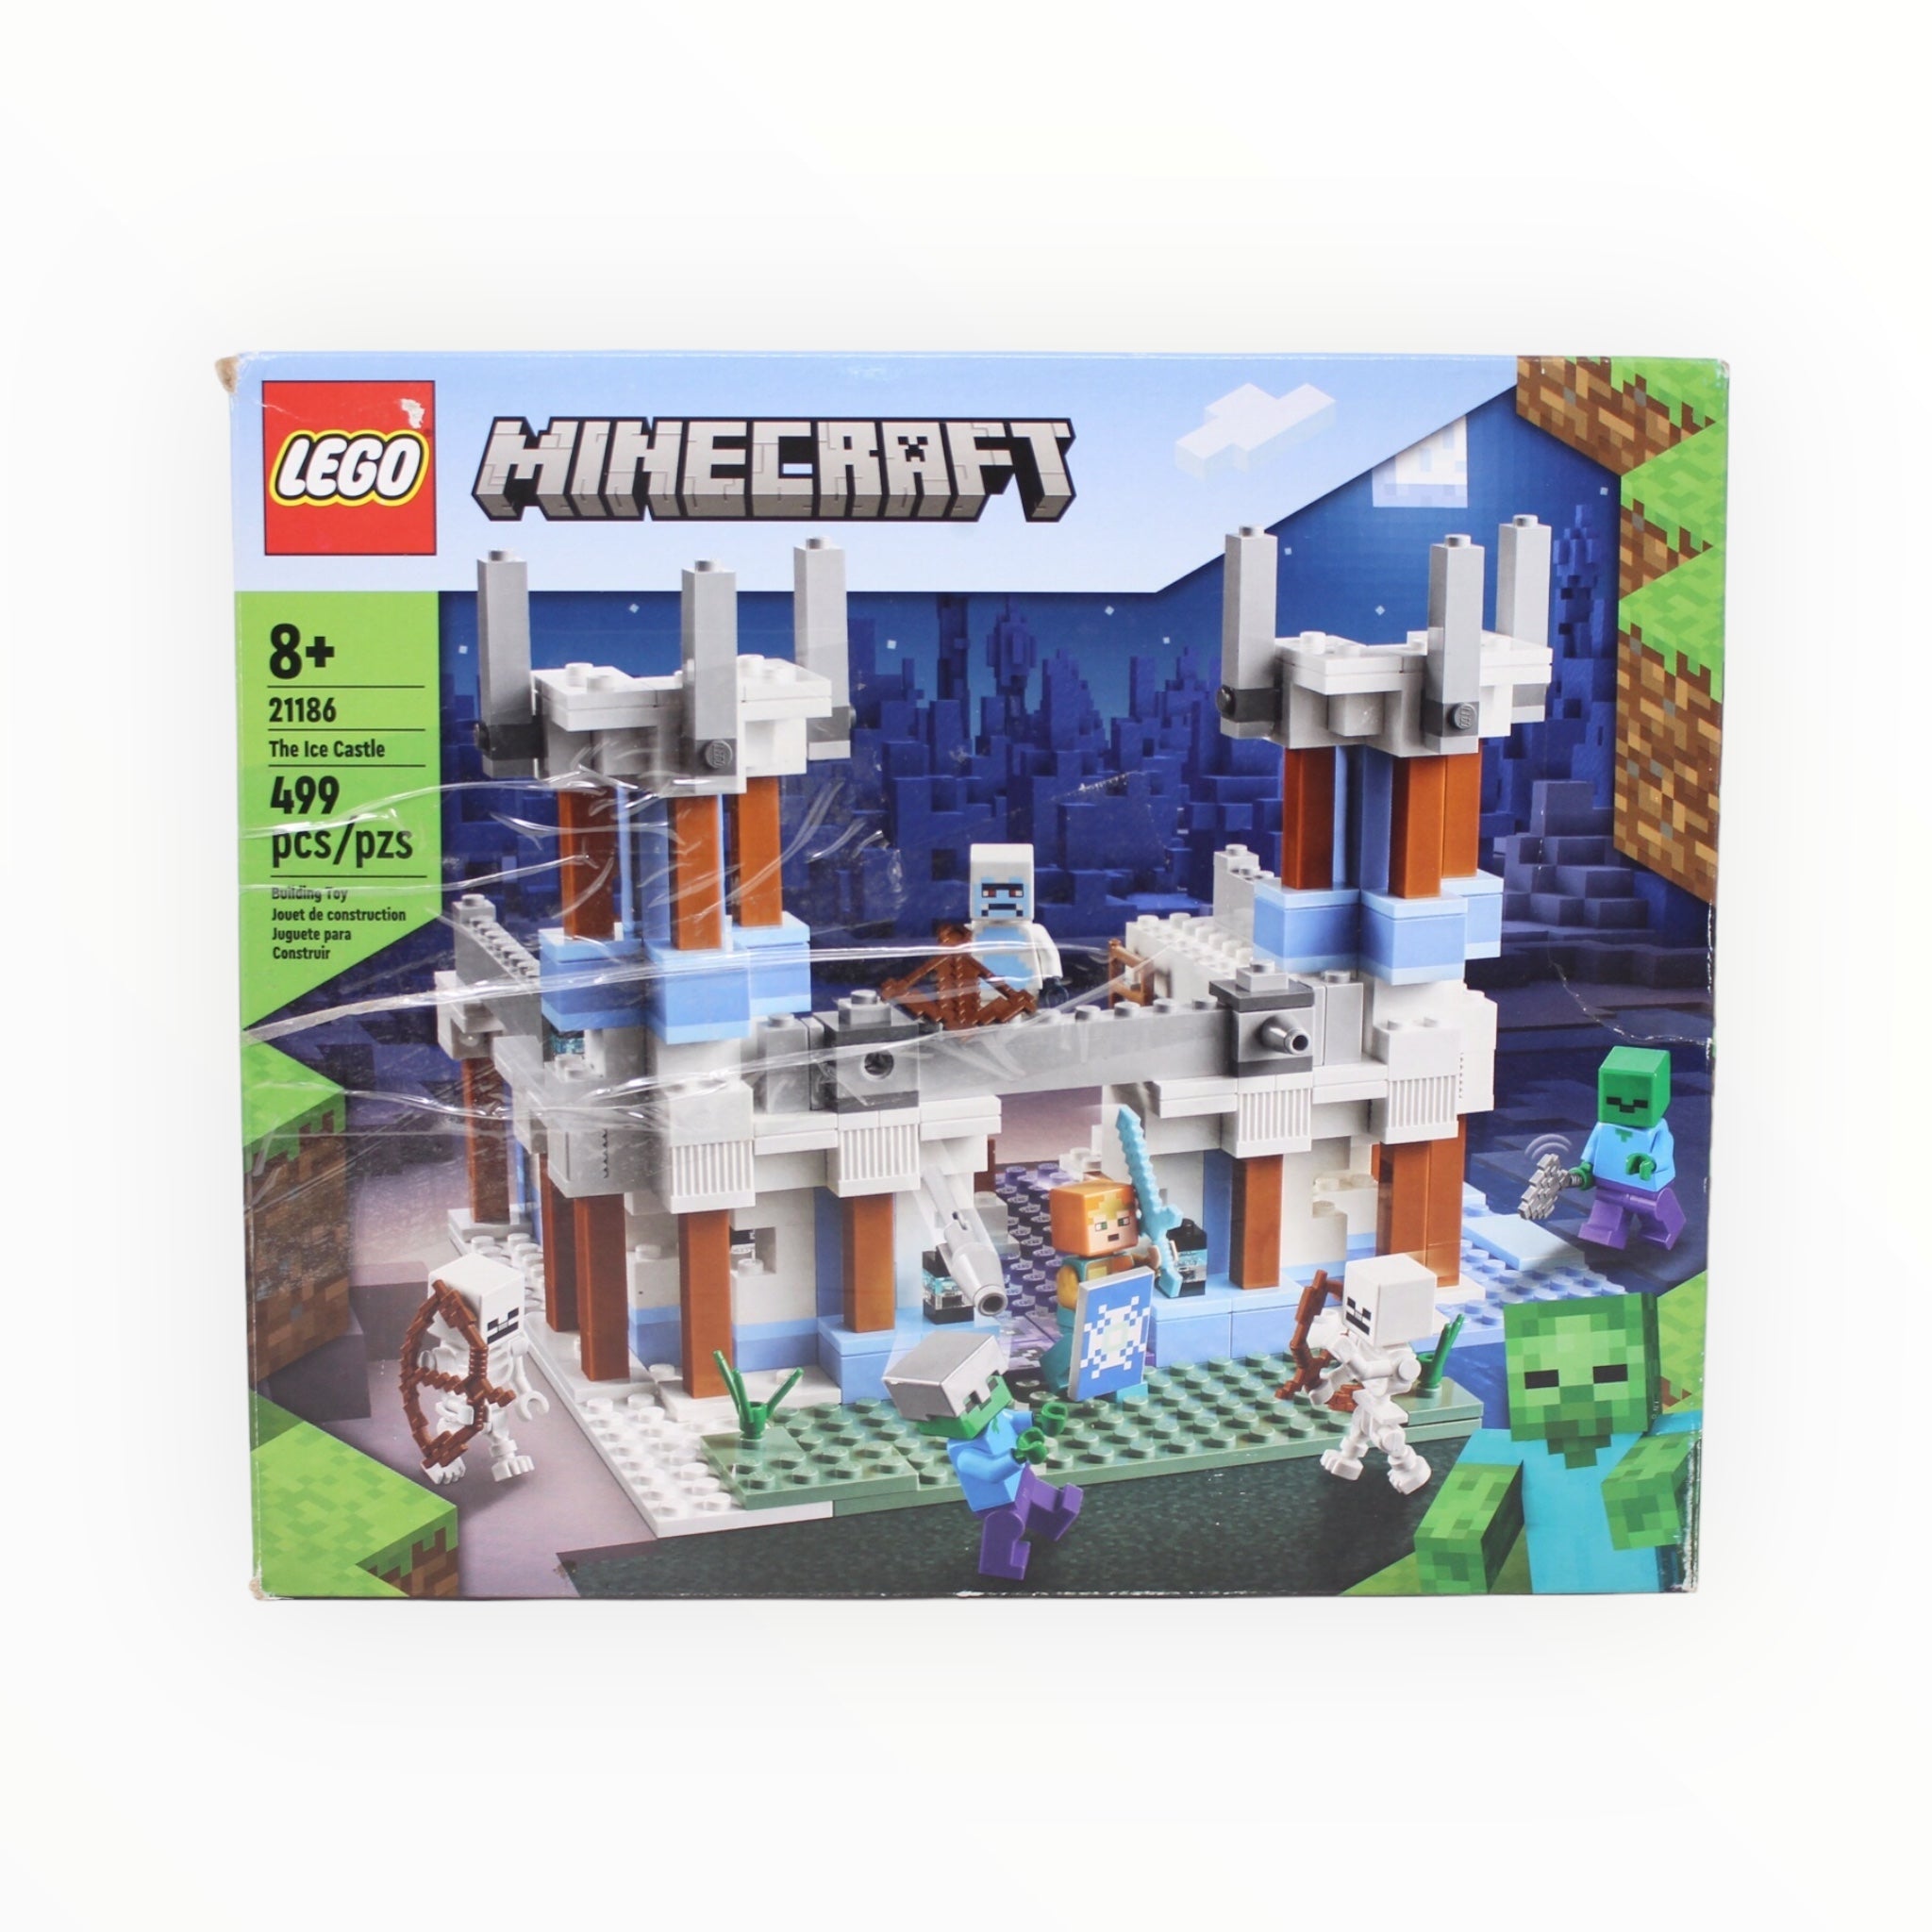 Certified Used Set 21186 Minecraft The Ice Castle (damaged box)